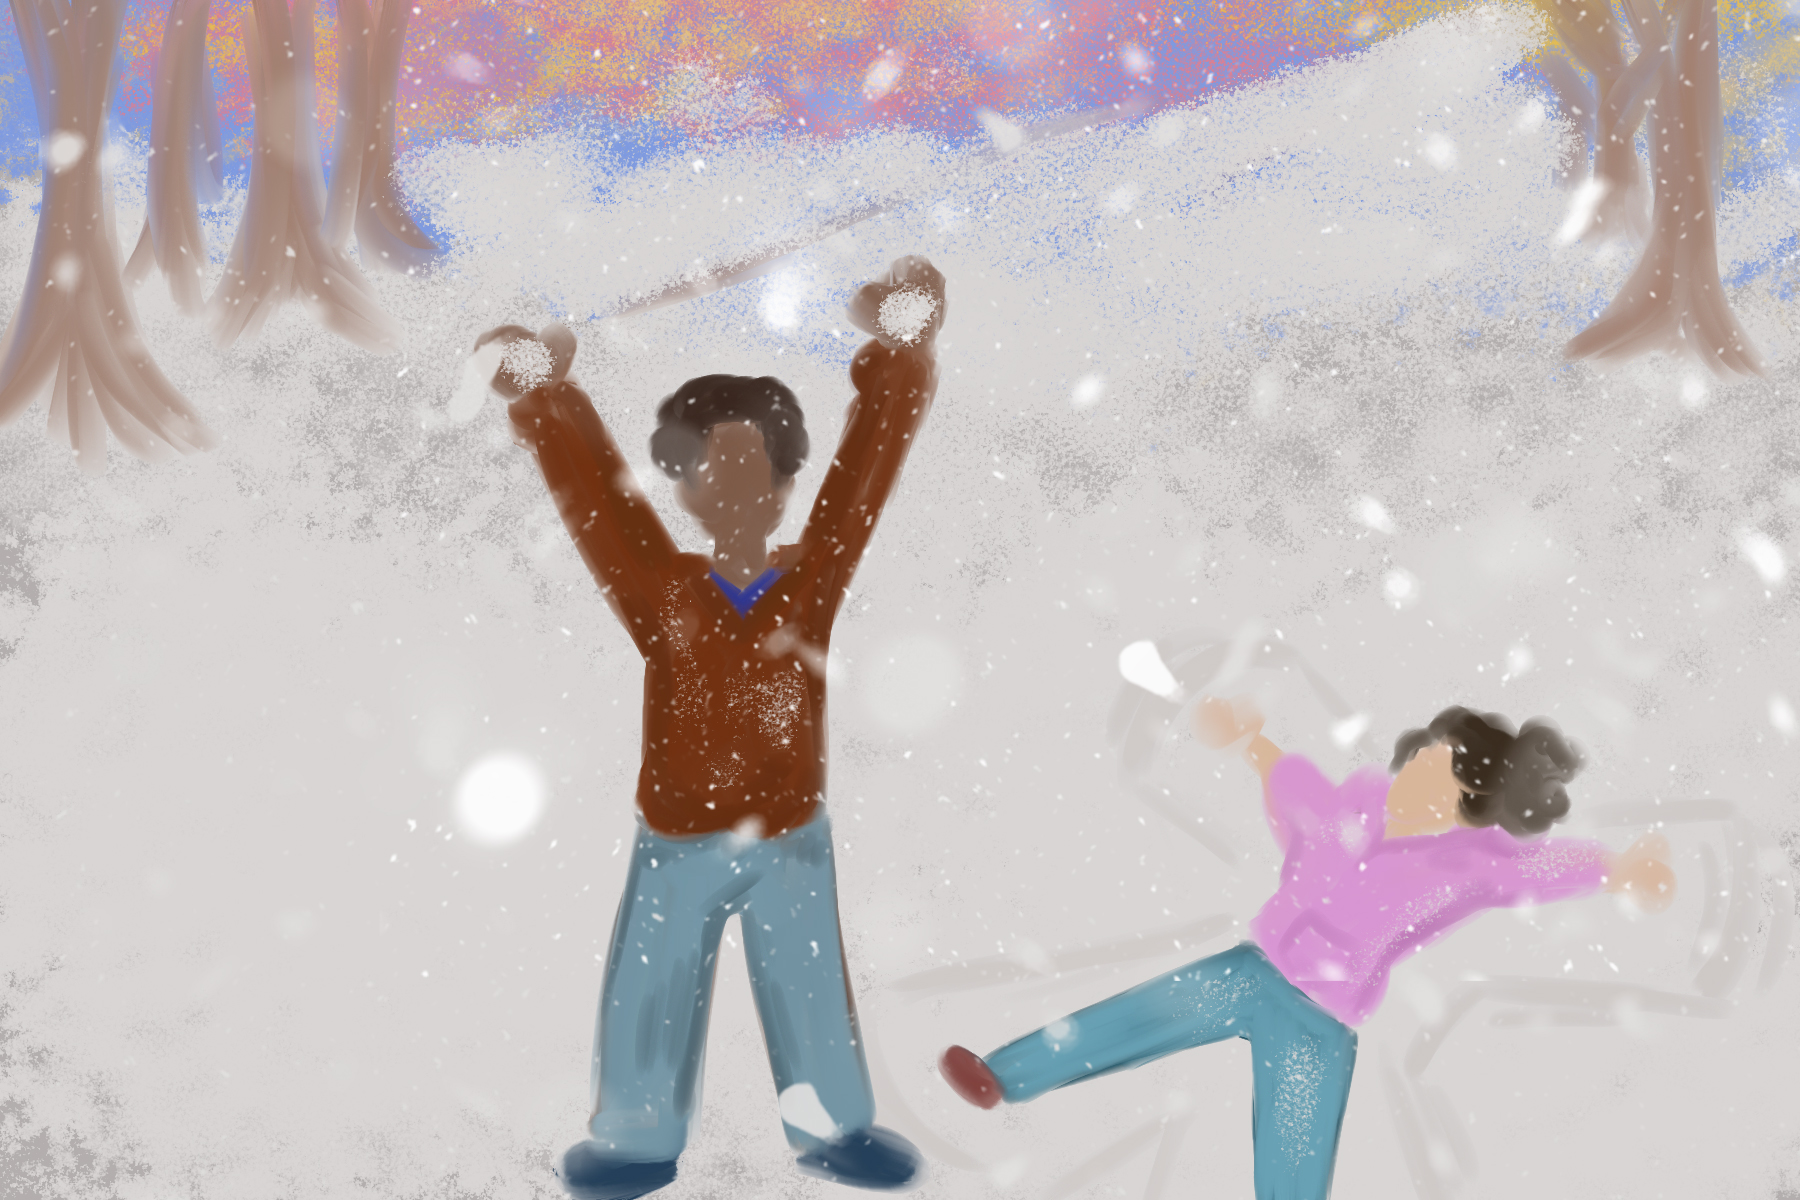 Netflix S Let It Snow Is A Cheesy Yet Charming Take On Holiday Movies